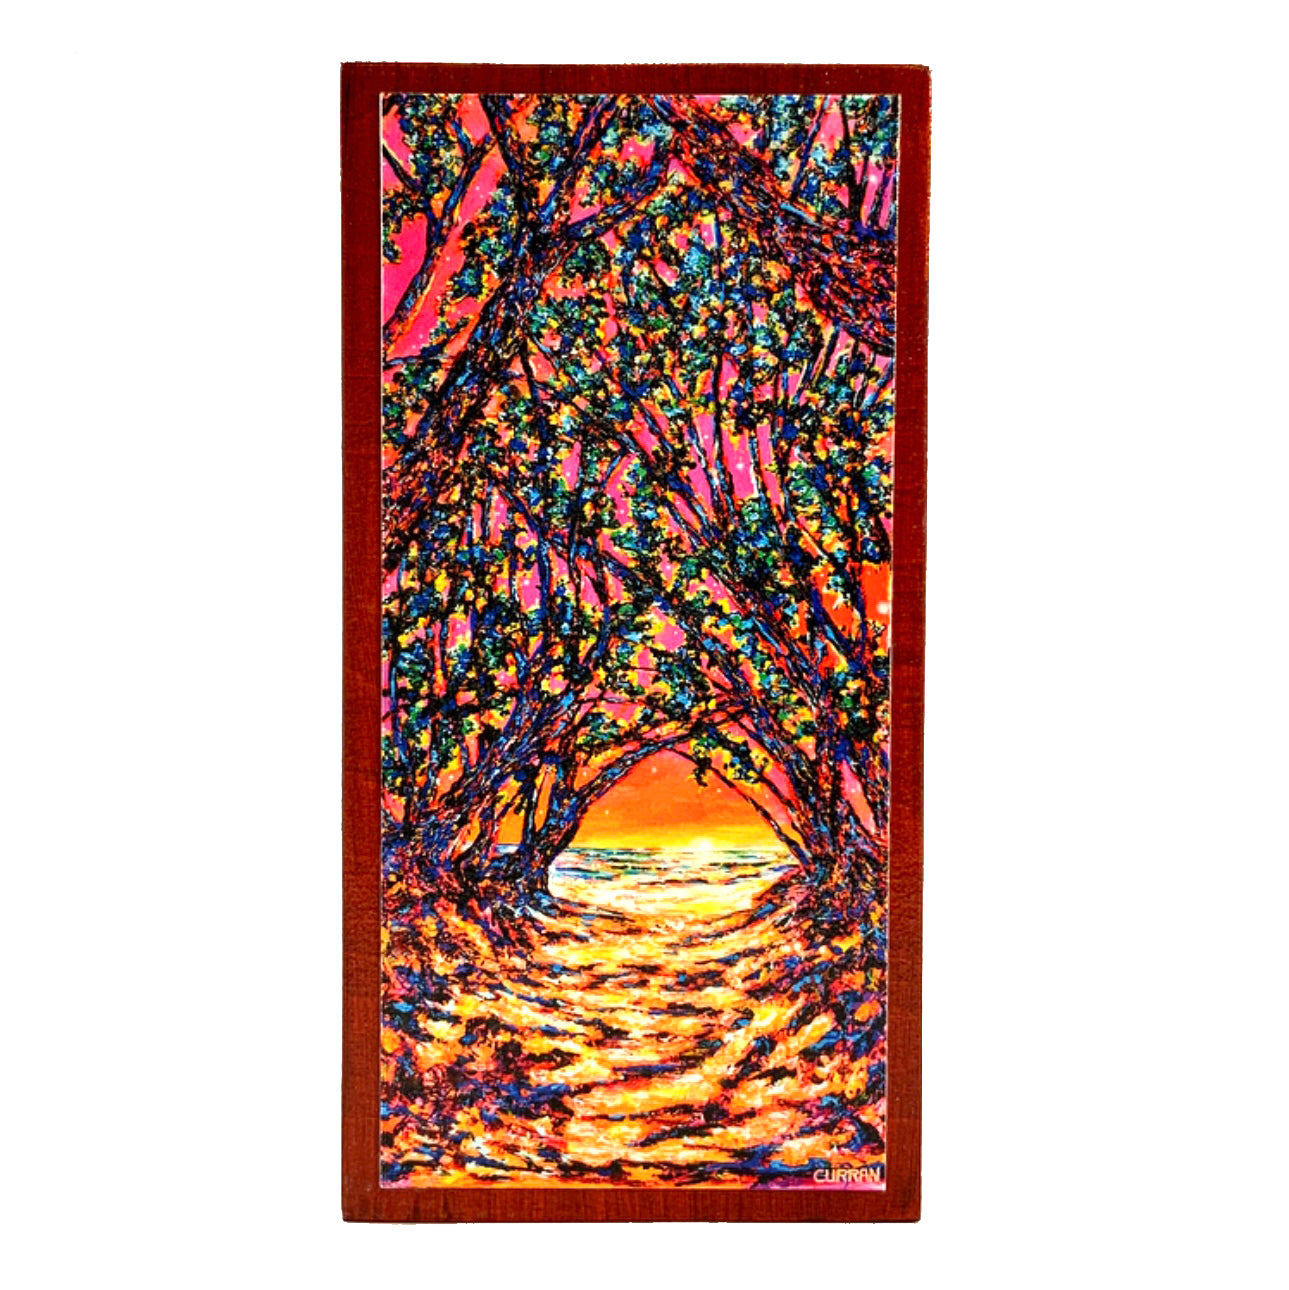 The Pathway -wood panel (Limited Edition)